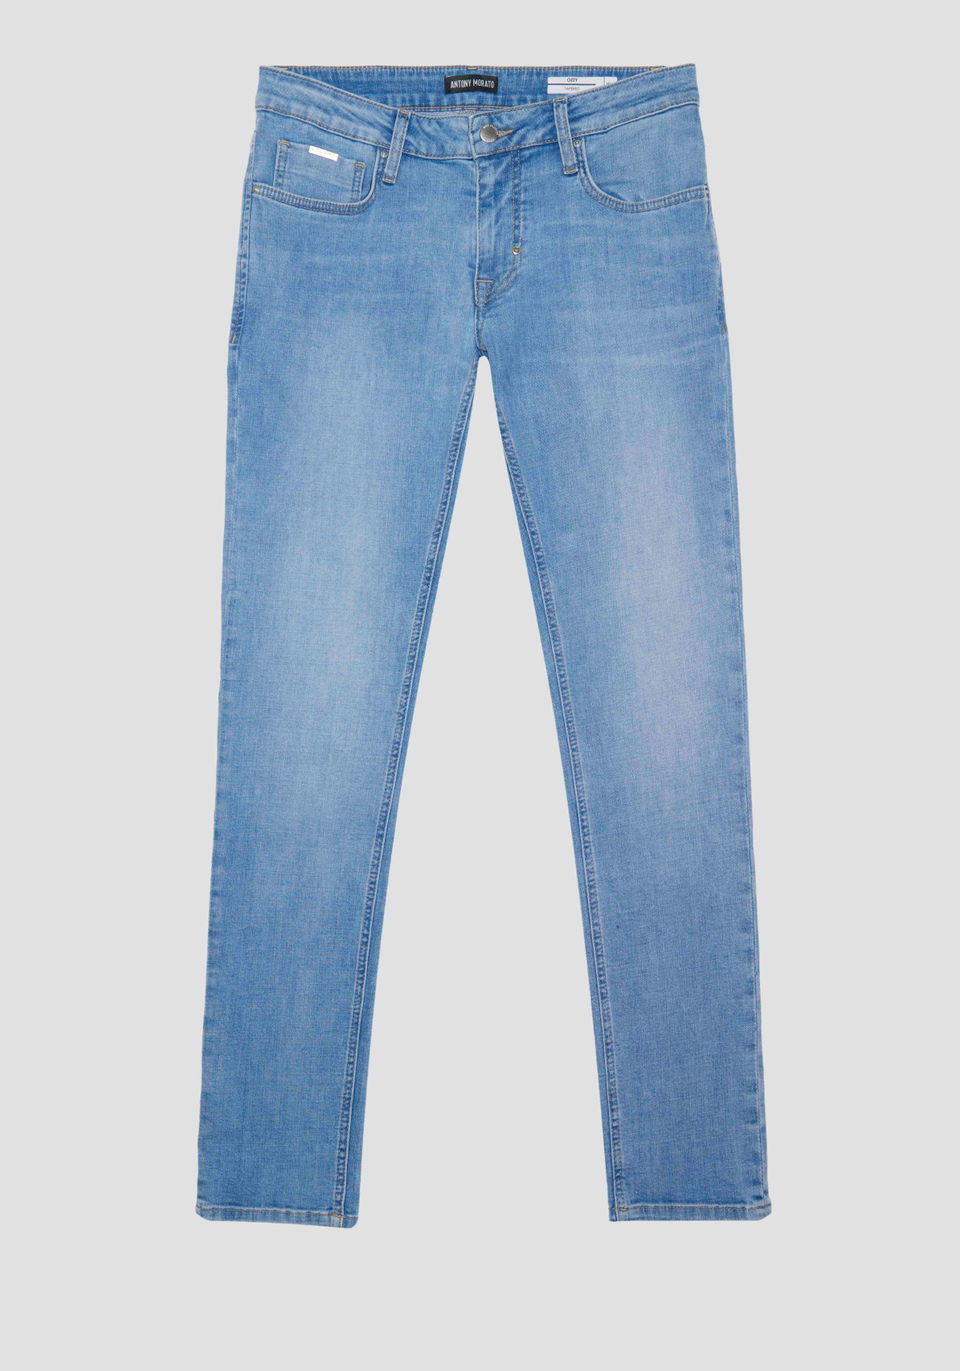 JEANS "OZZY" TAPERED FIT IN ICONIC BASIC BLUE DENIM - Antony Morato Online Shop